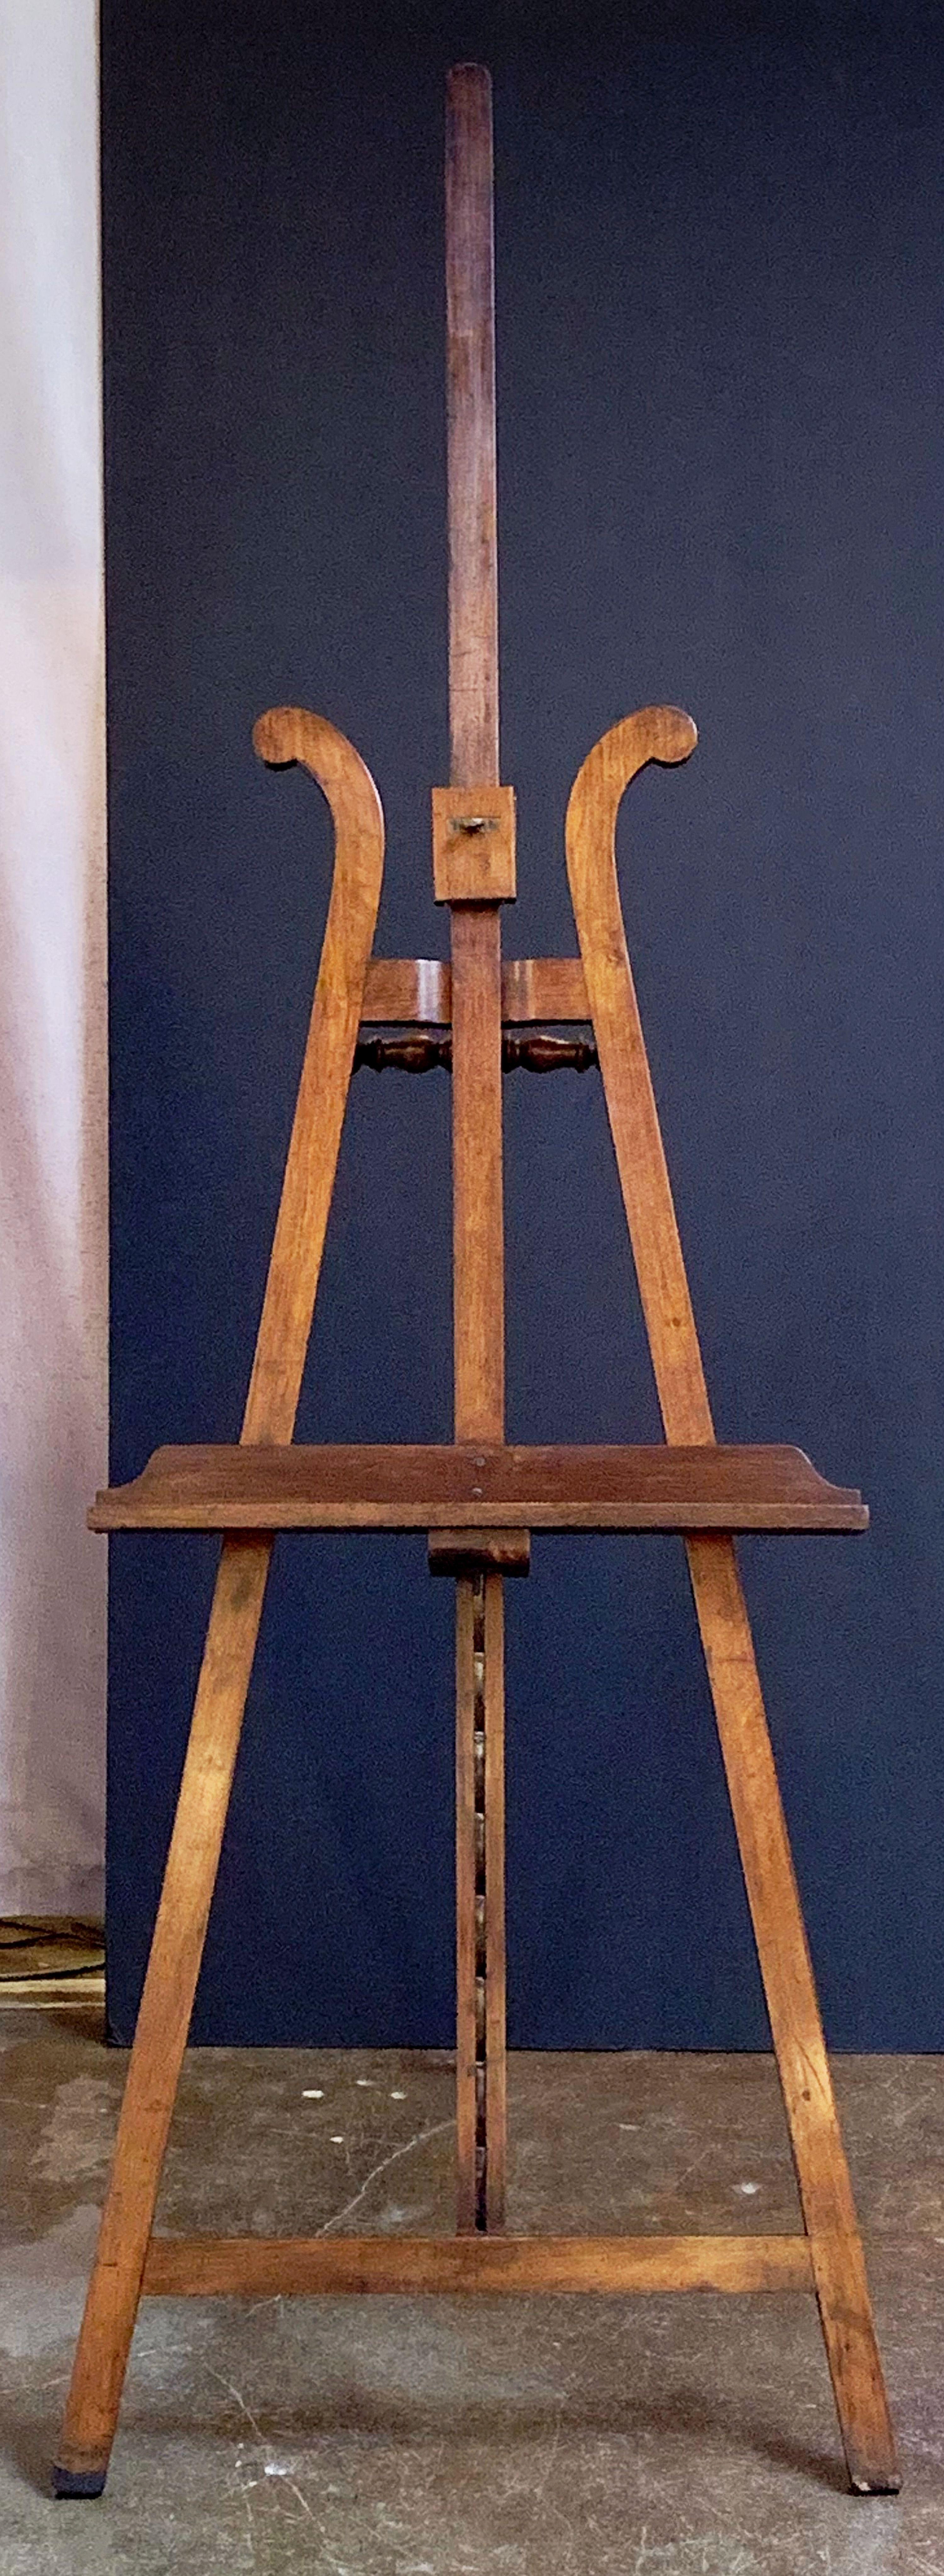 A handsome French artist's gallery display or studio floor easel from the 19th century, featuring a sliding mahogany and brass mechanism to adjust the tray height, with turned mahogany accents to the top and back.

Dimensions are: Max H 96 inches